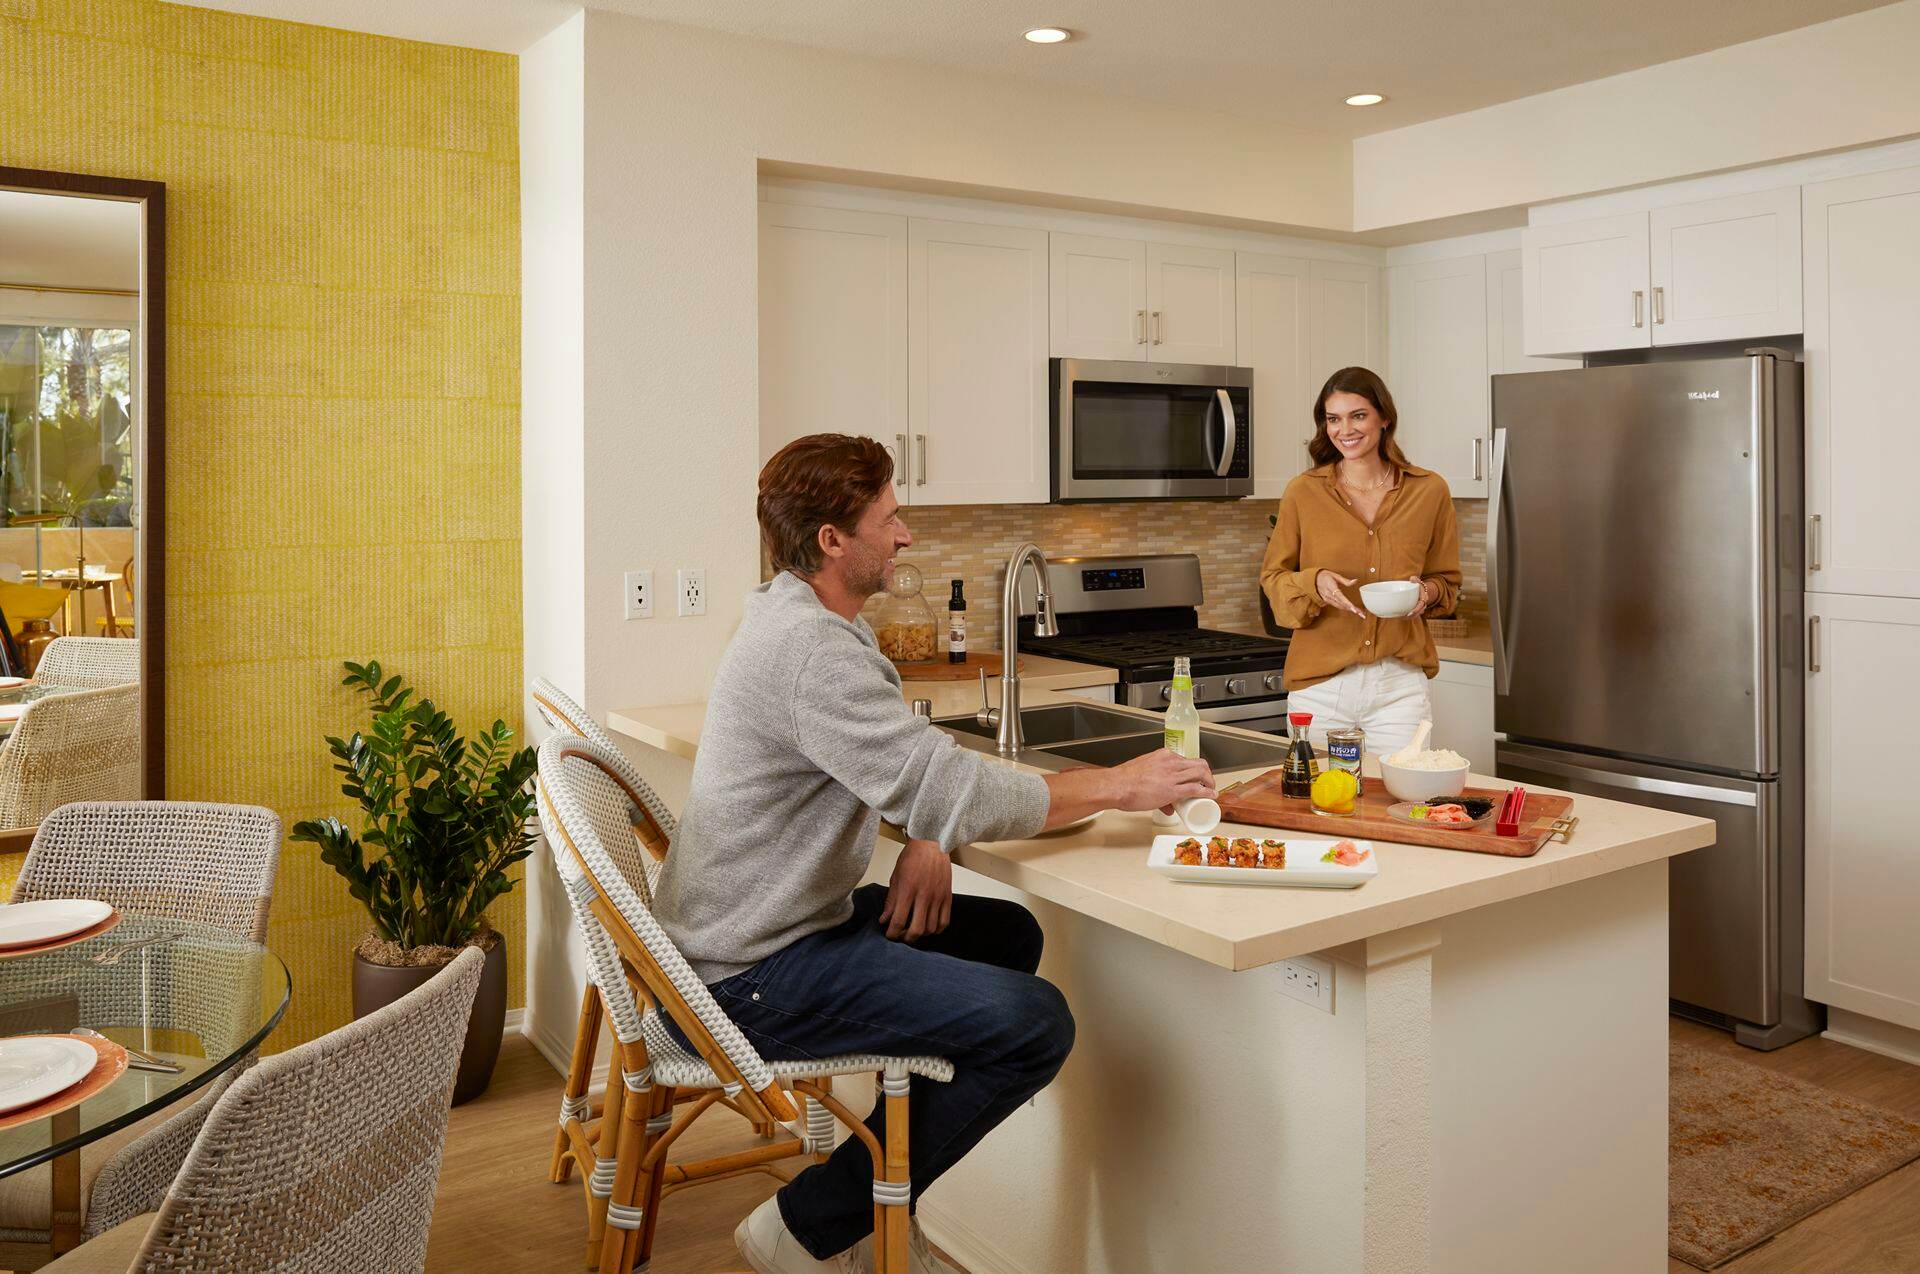 Interior view of couple in the kitchen at Turtle Ridge Apartment Homes in Irvine, CA.